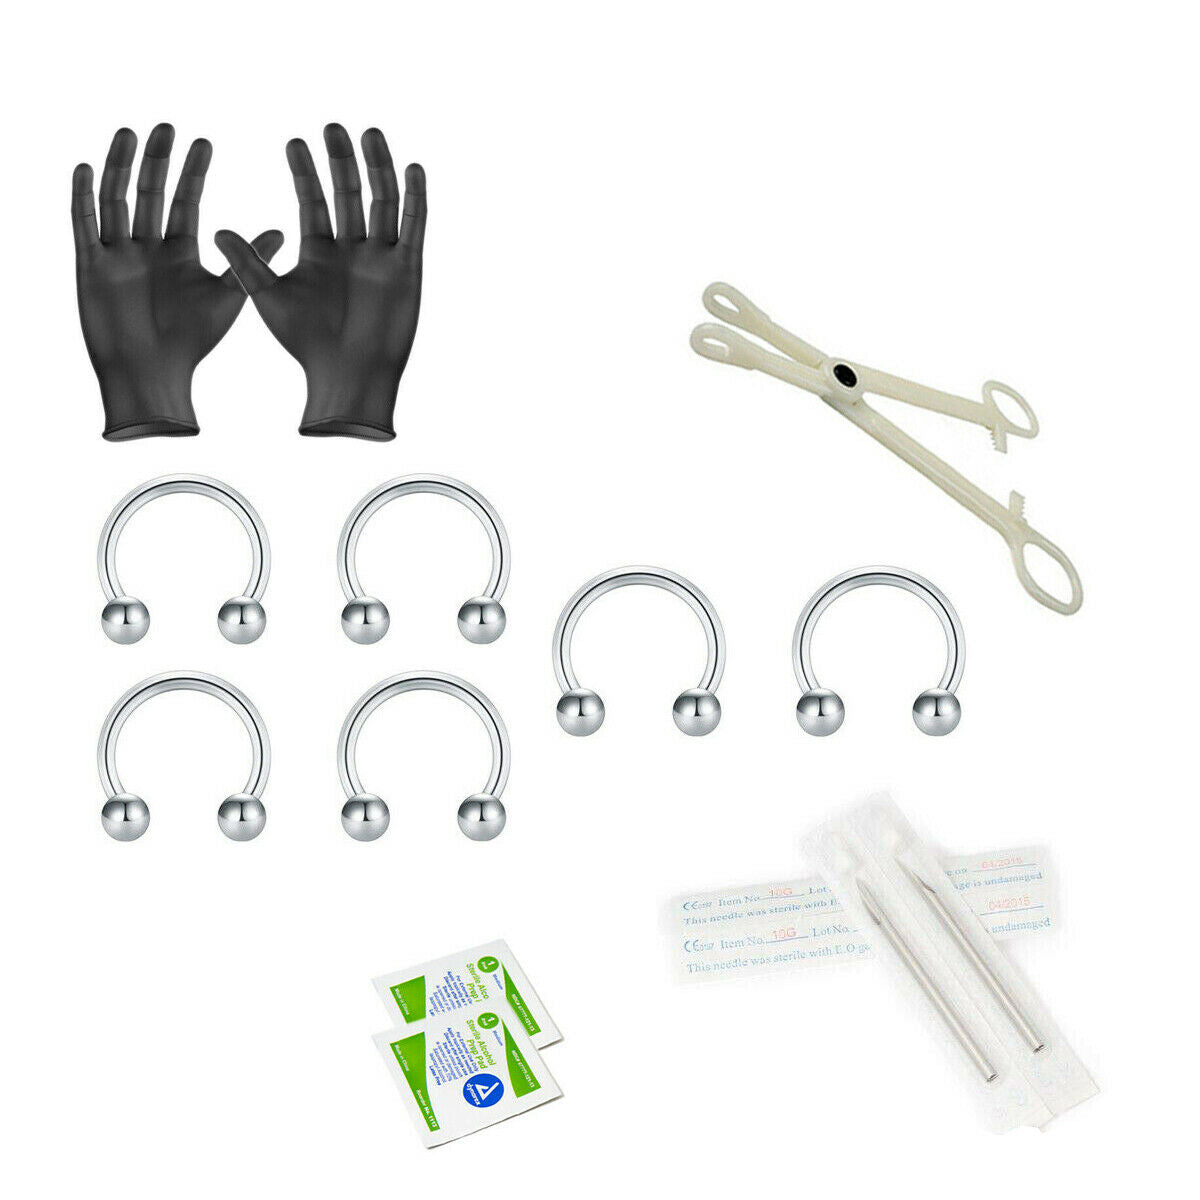 12-Piece Circular Barbell Horseshoe Piercing Kit - Includes (6) 14g Circular Barbell Horseshoe, (2) Needles, (1) Forceps, (2) Alcohol Wipes and a Pair of Gloves